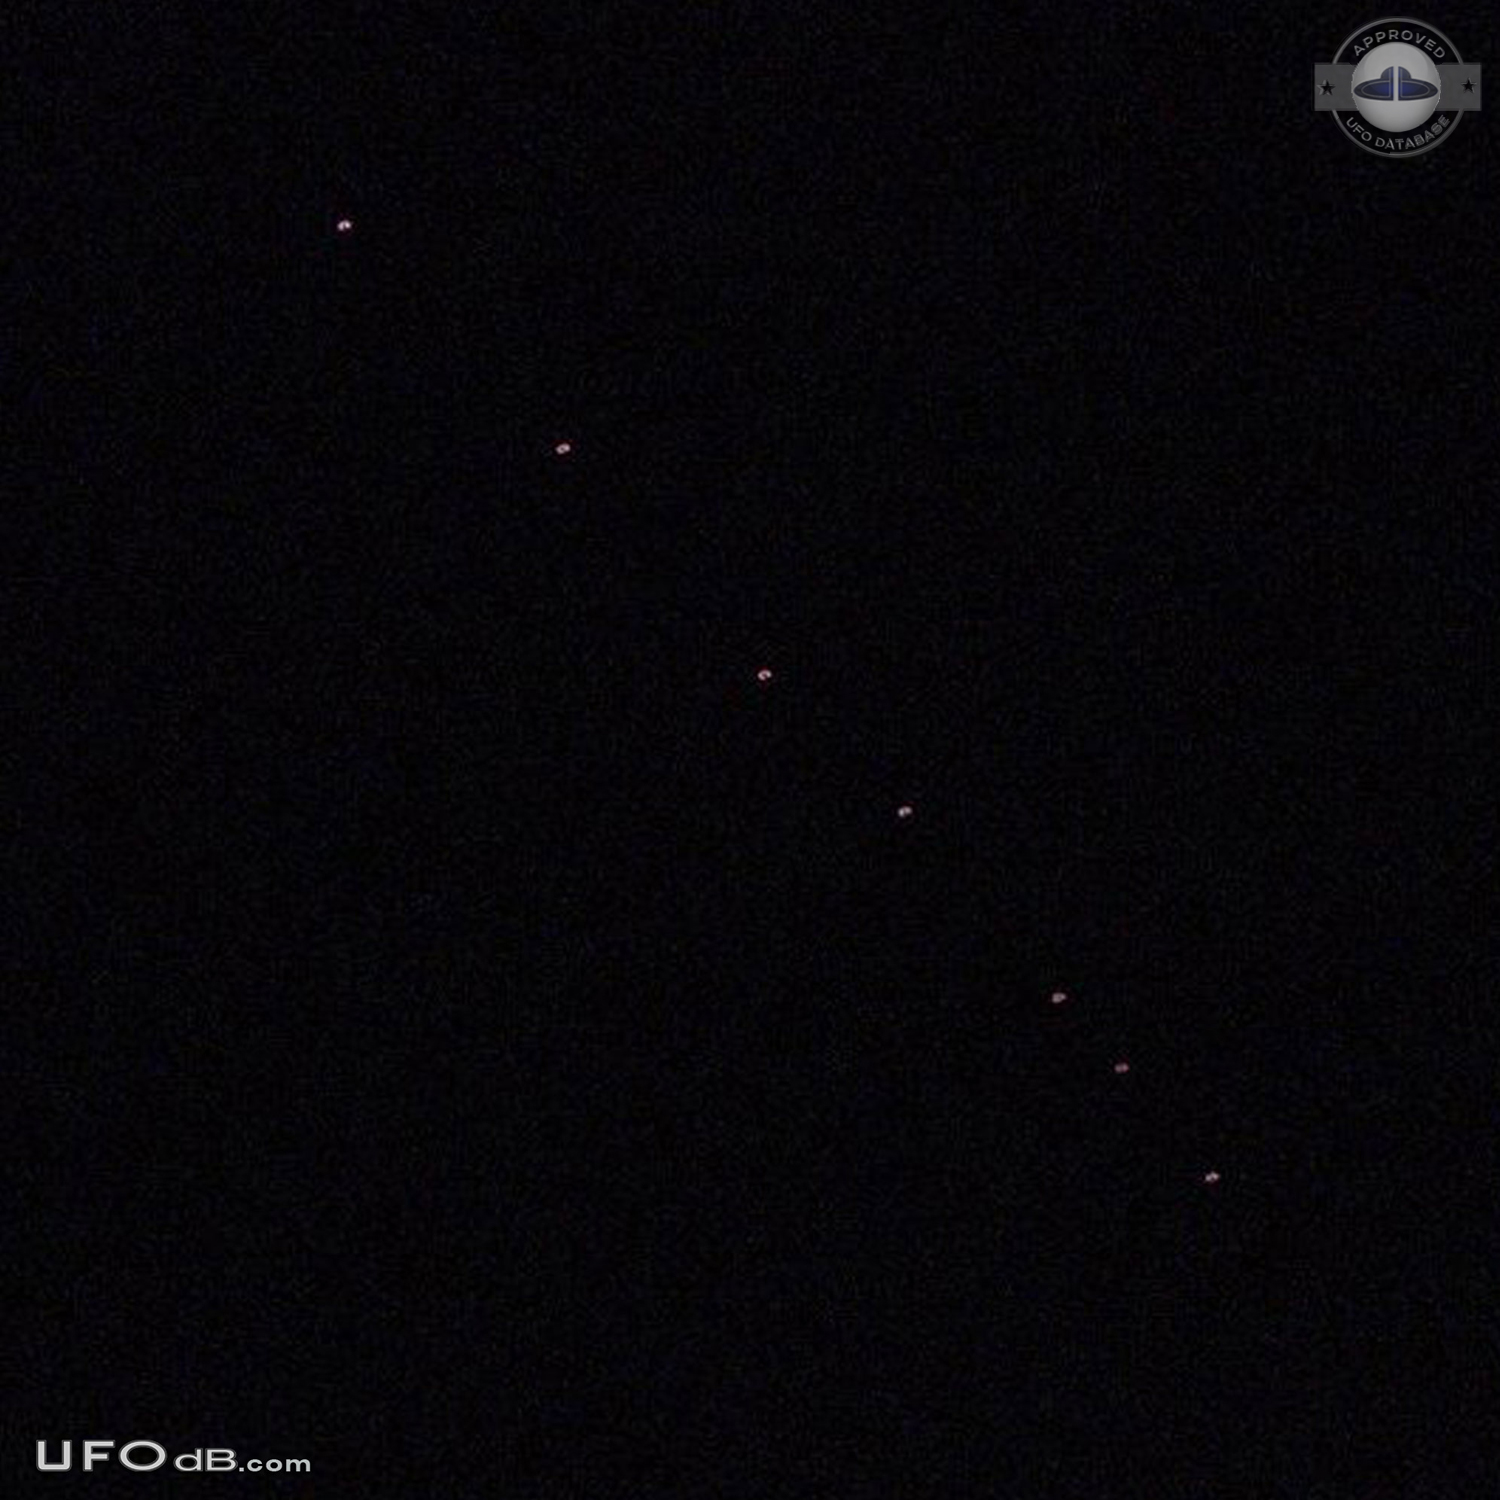 UFOs seen by several Marines over Camp Leatherneck, Afghanistan 2010 UFO Picture #490-1